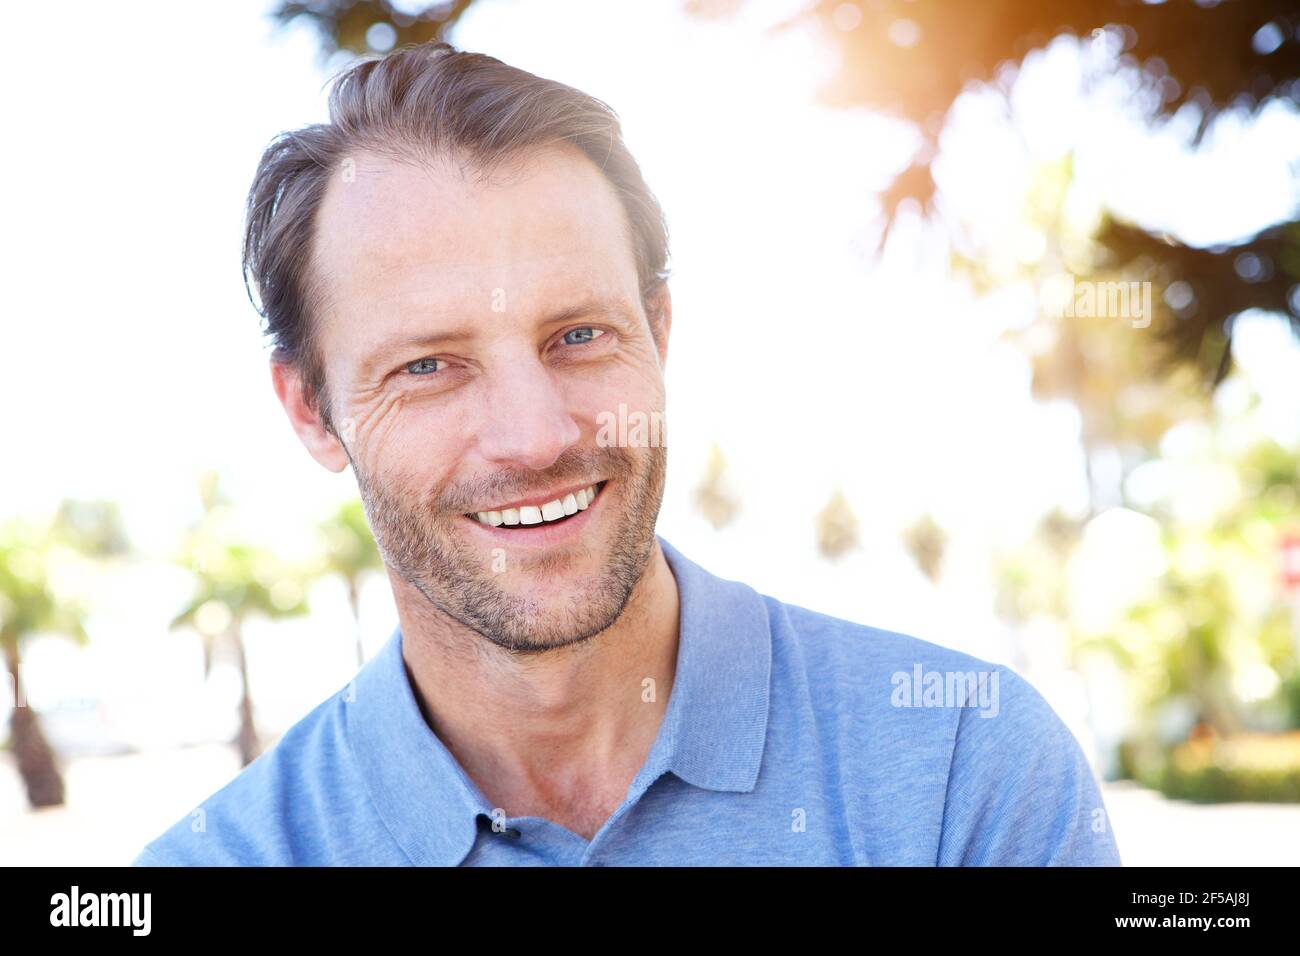 Close up portrait of handsome middle age man smiling outdoors Stock Photo